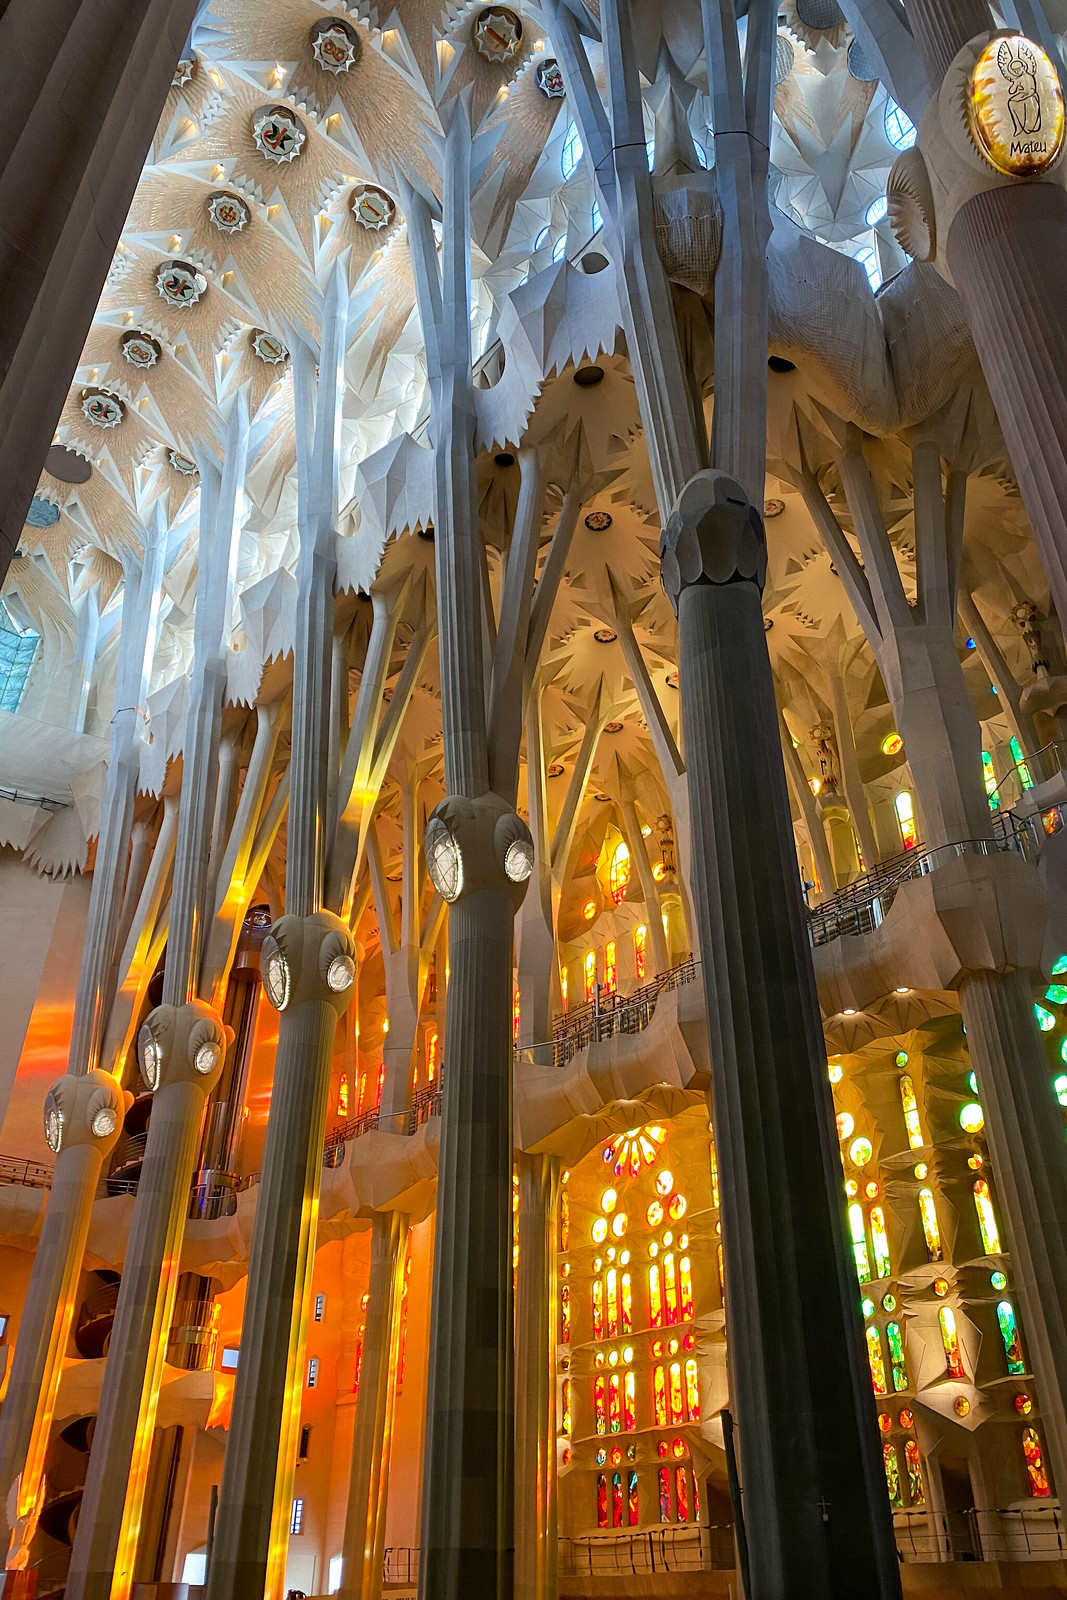 Basilica de la Sagrada Familia | Photos to Inspire You to Visit Spain | European Vacation Inspiration | Spain Travel | Spain Aesthetics | Spain Aesthetic | Most Beautiful Places in Spain | Best Places to Visit in Spain | Famous Barcelona Landmarks | Historical Sites of Barcelona